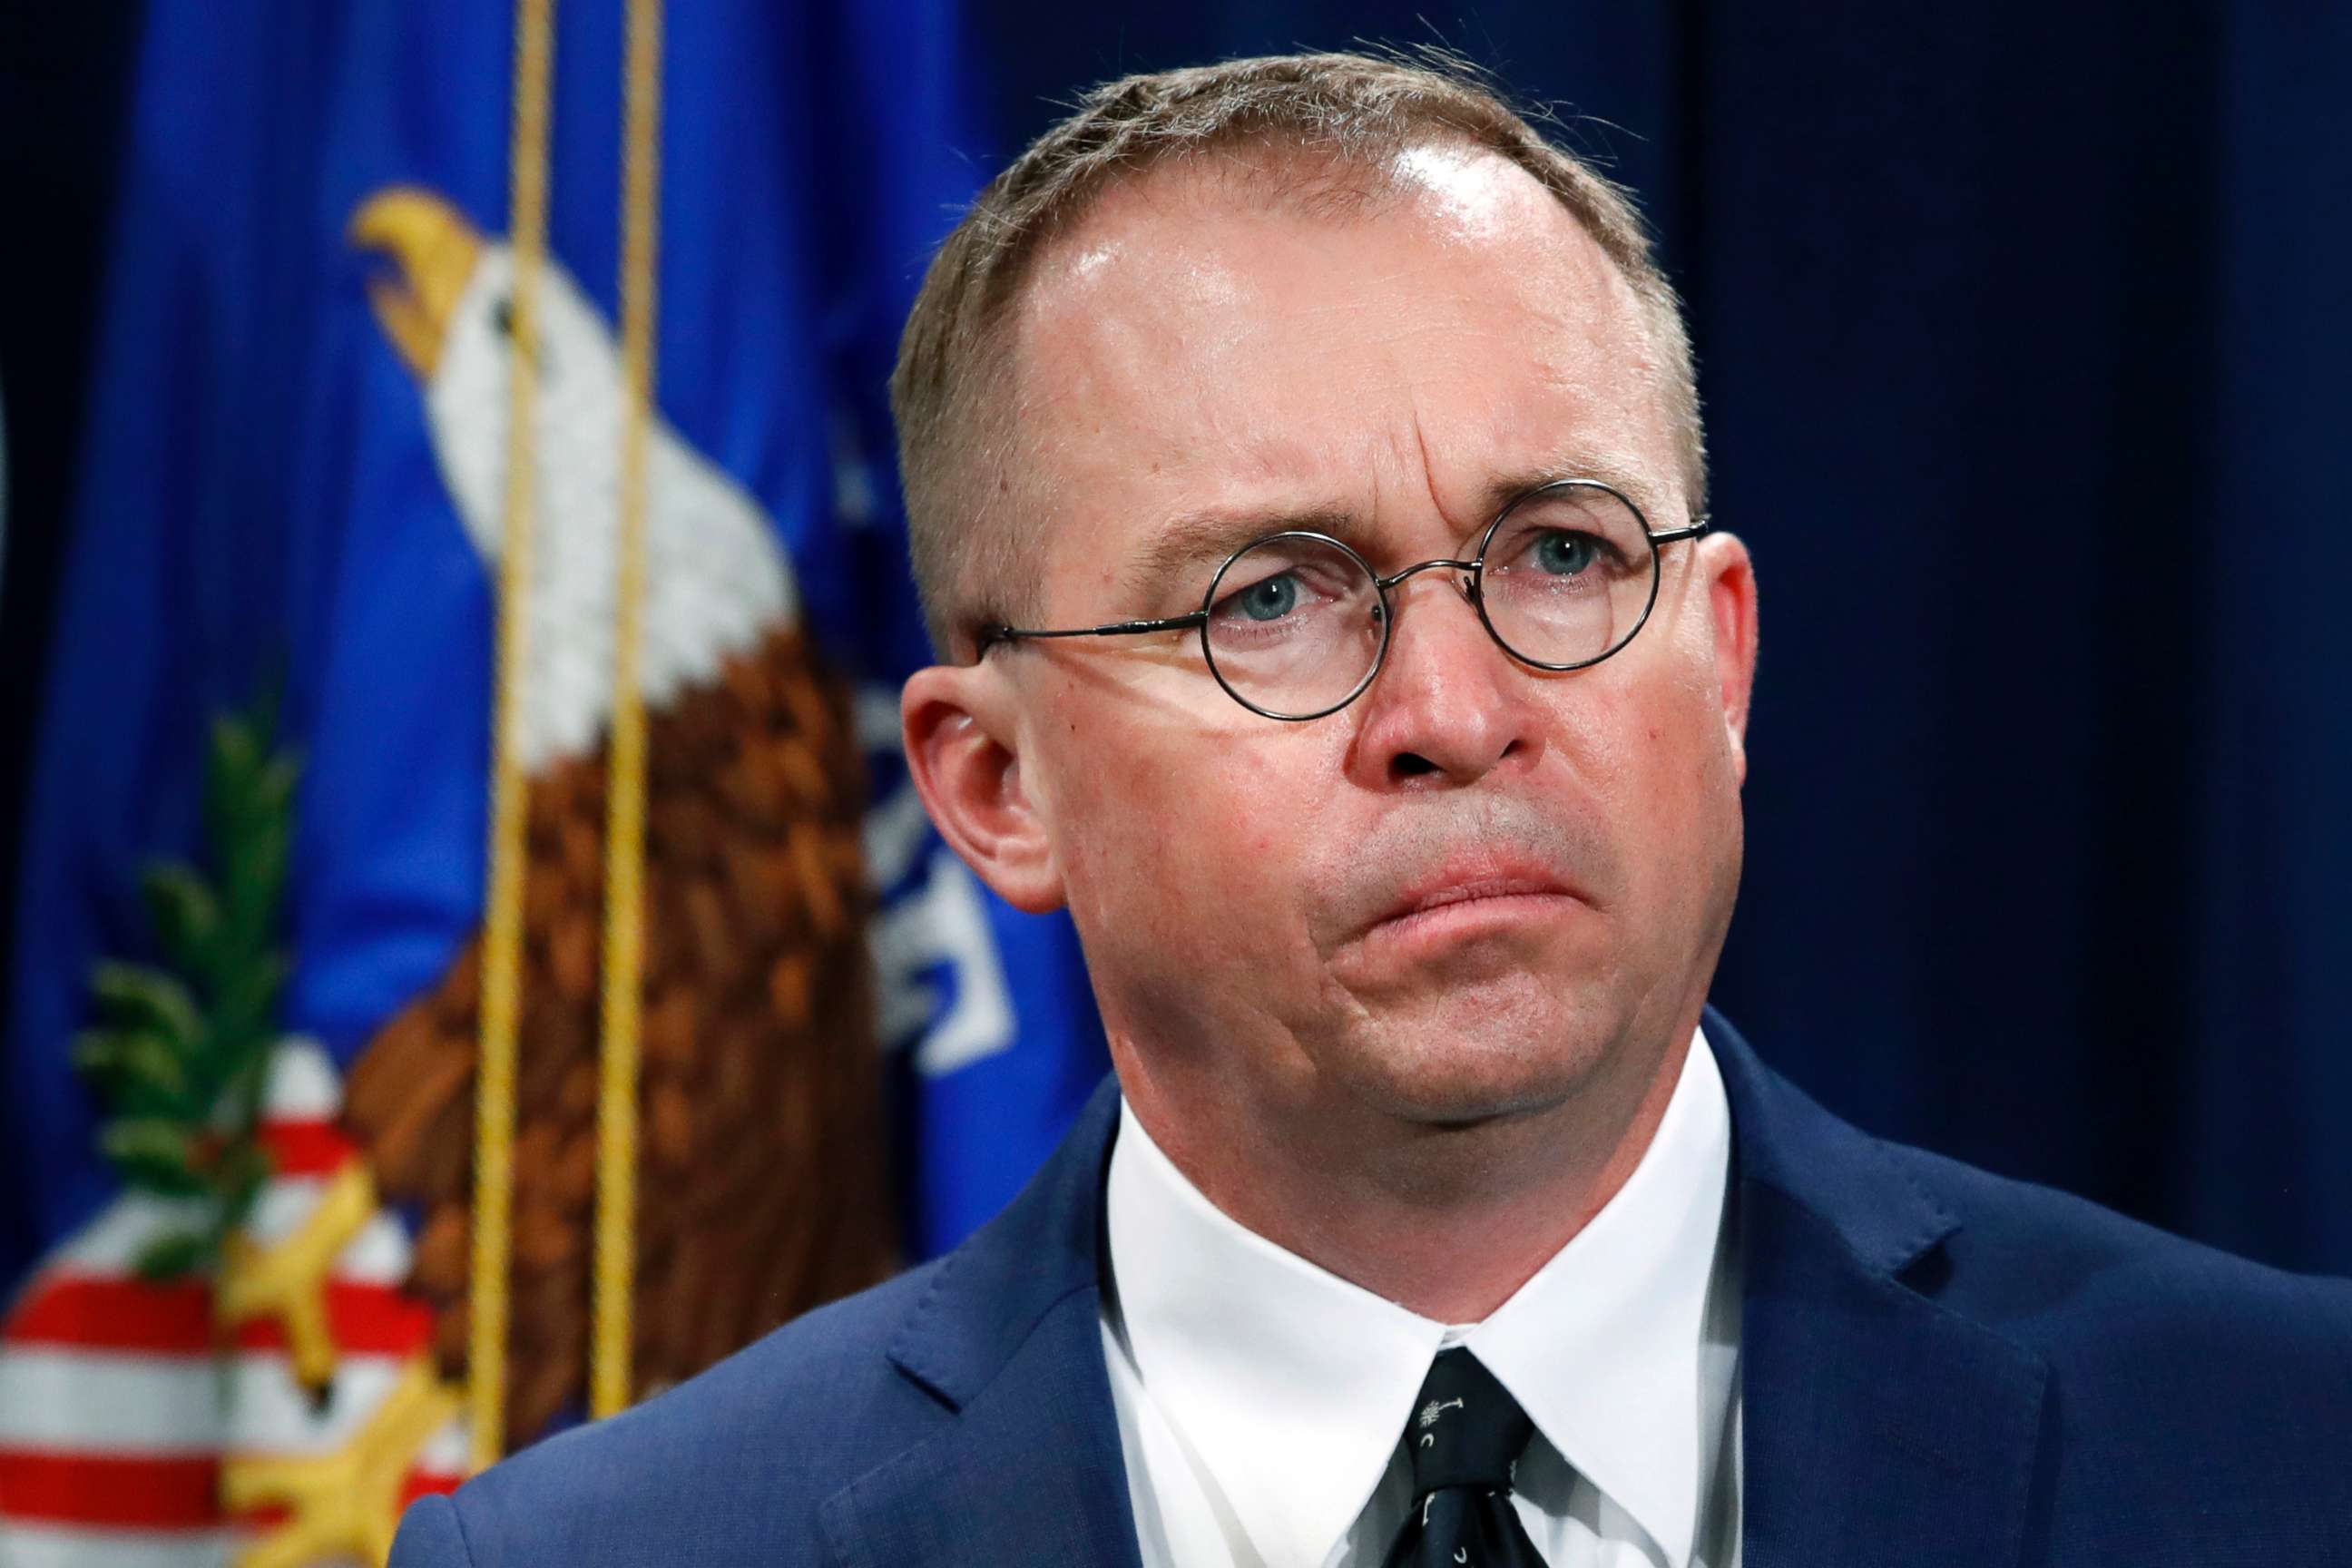 PHOTO: Mick Mulvaney, acting director of the Consumer Financial Protection Bureau (CFPB), and Director of the Office of Management, listens during a news conference at the Department of Justice in Washington, July 11, 2018.